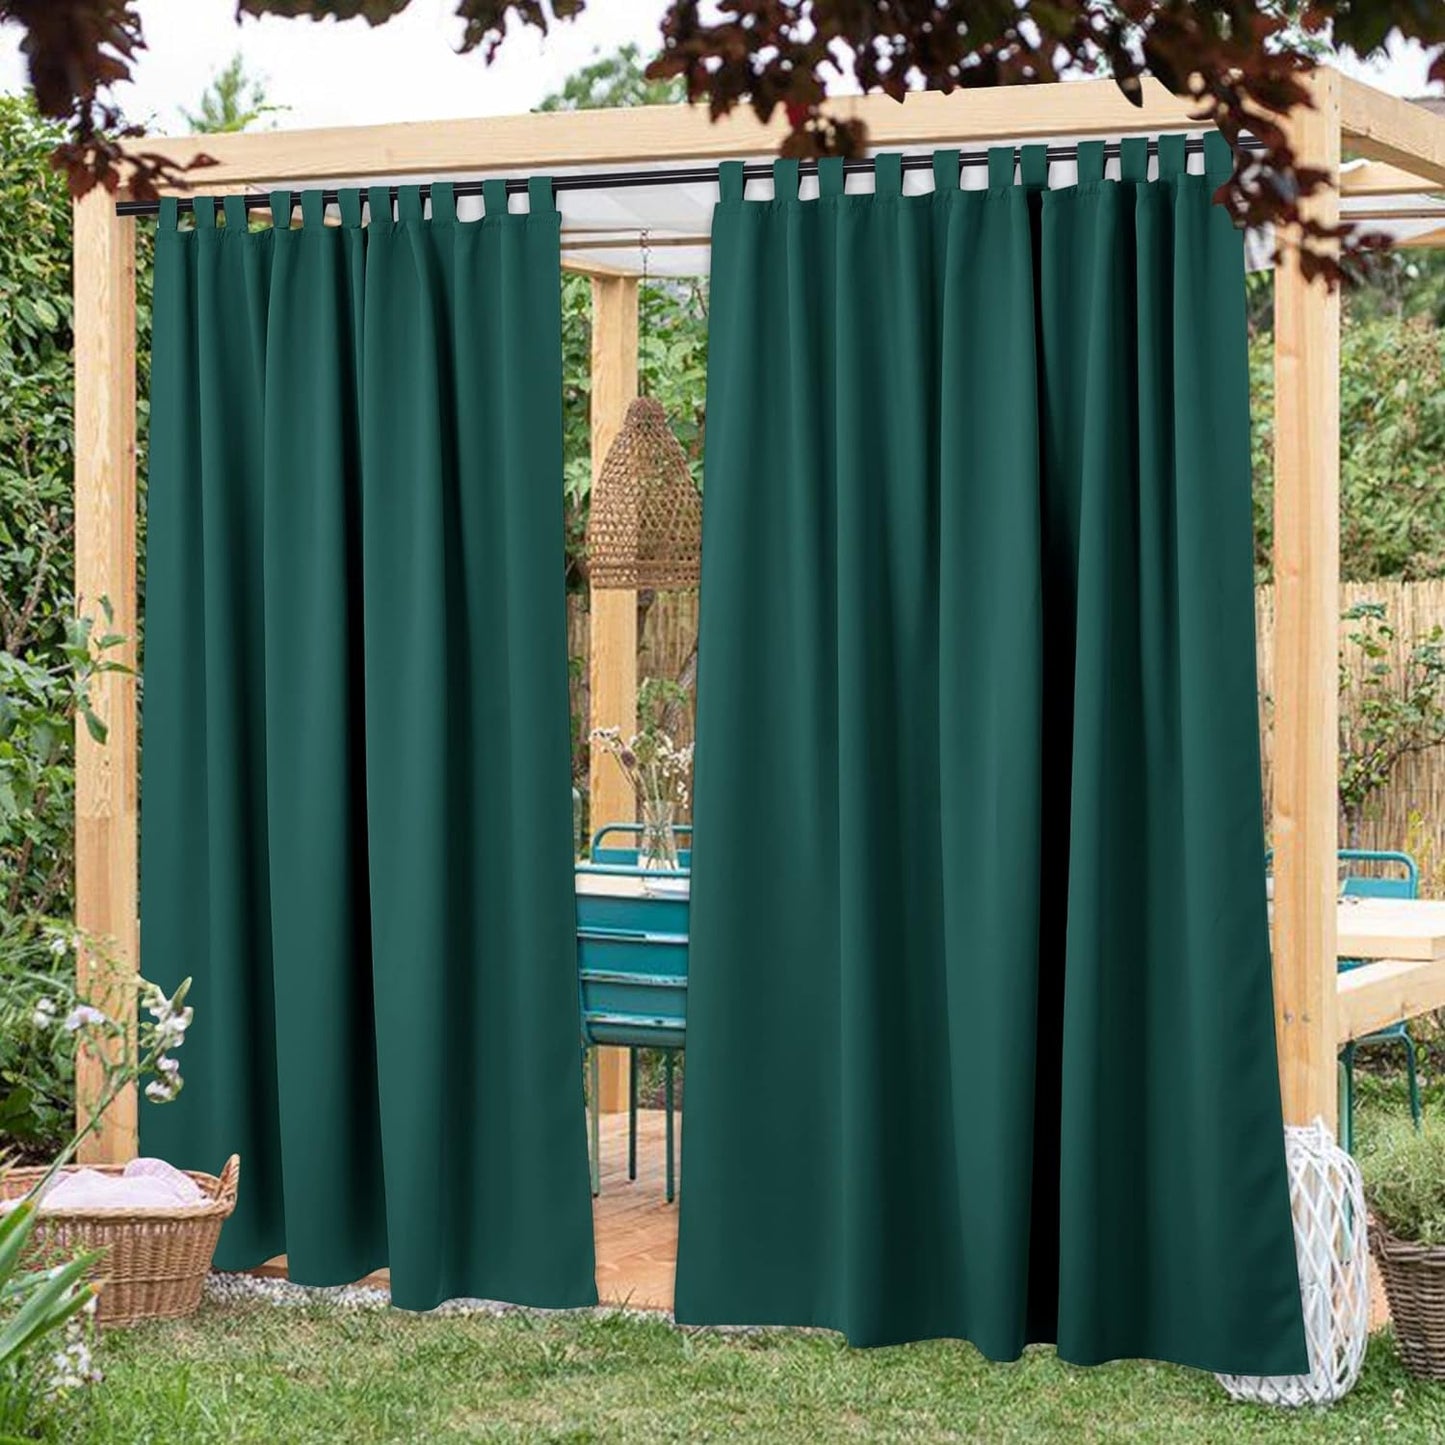 NICETOWN 2 Panels Outdoor Patio Curtainss Waterproof Room Darkening Drapes, Detachable Sticky Tab Top Thermal Insulated Privacy Outdoor Dividers for Porch/Doorway, Biscotti Beige, W52 X L84  NICETOWN Hunter Green W84 X L95 